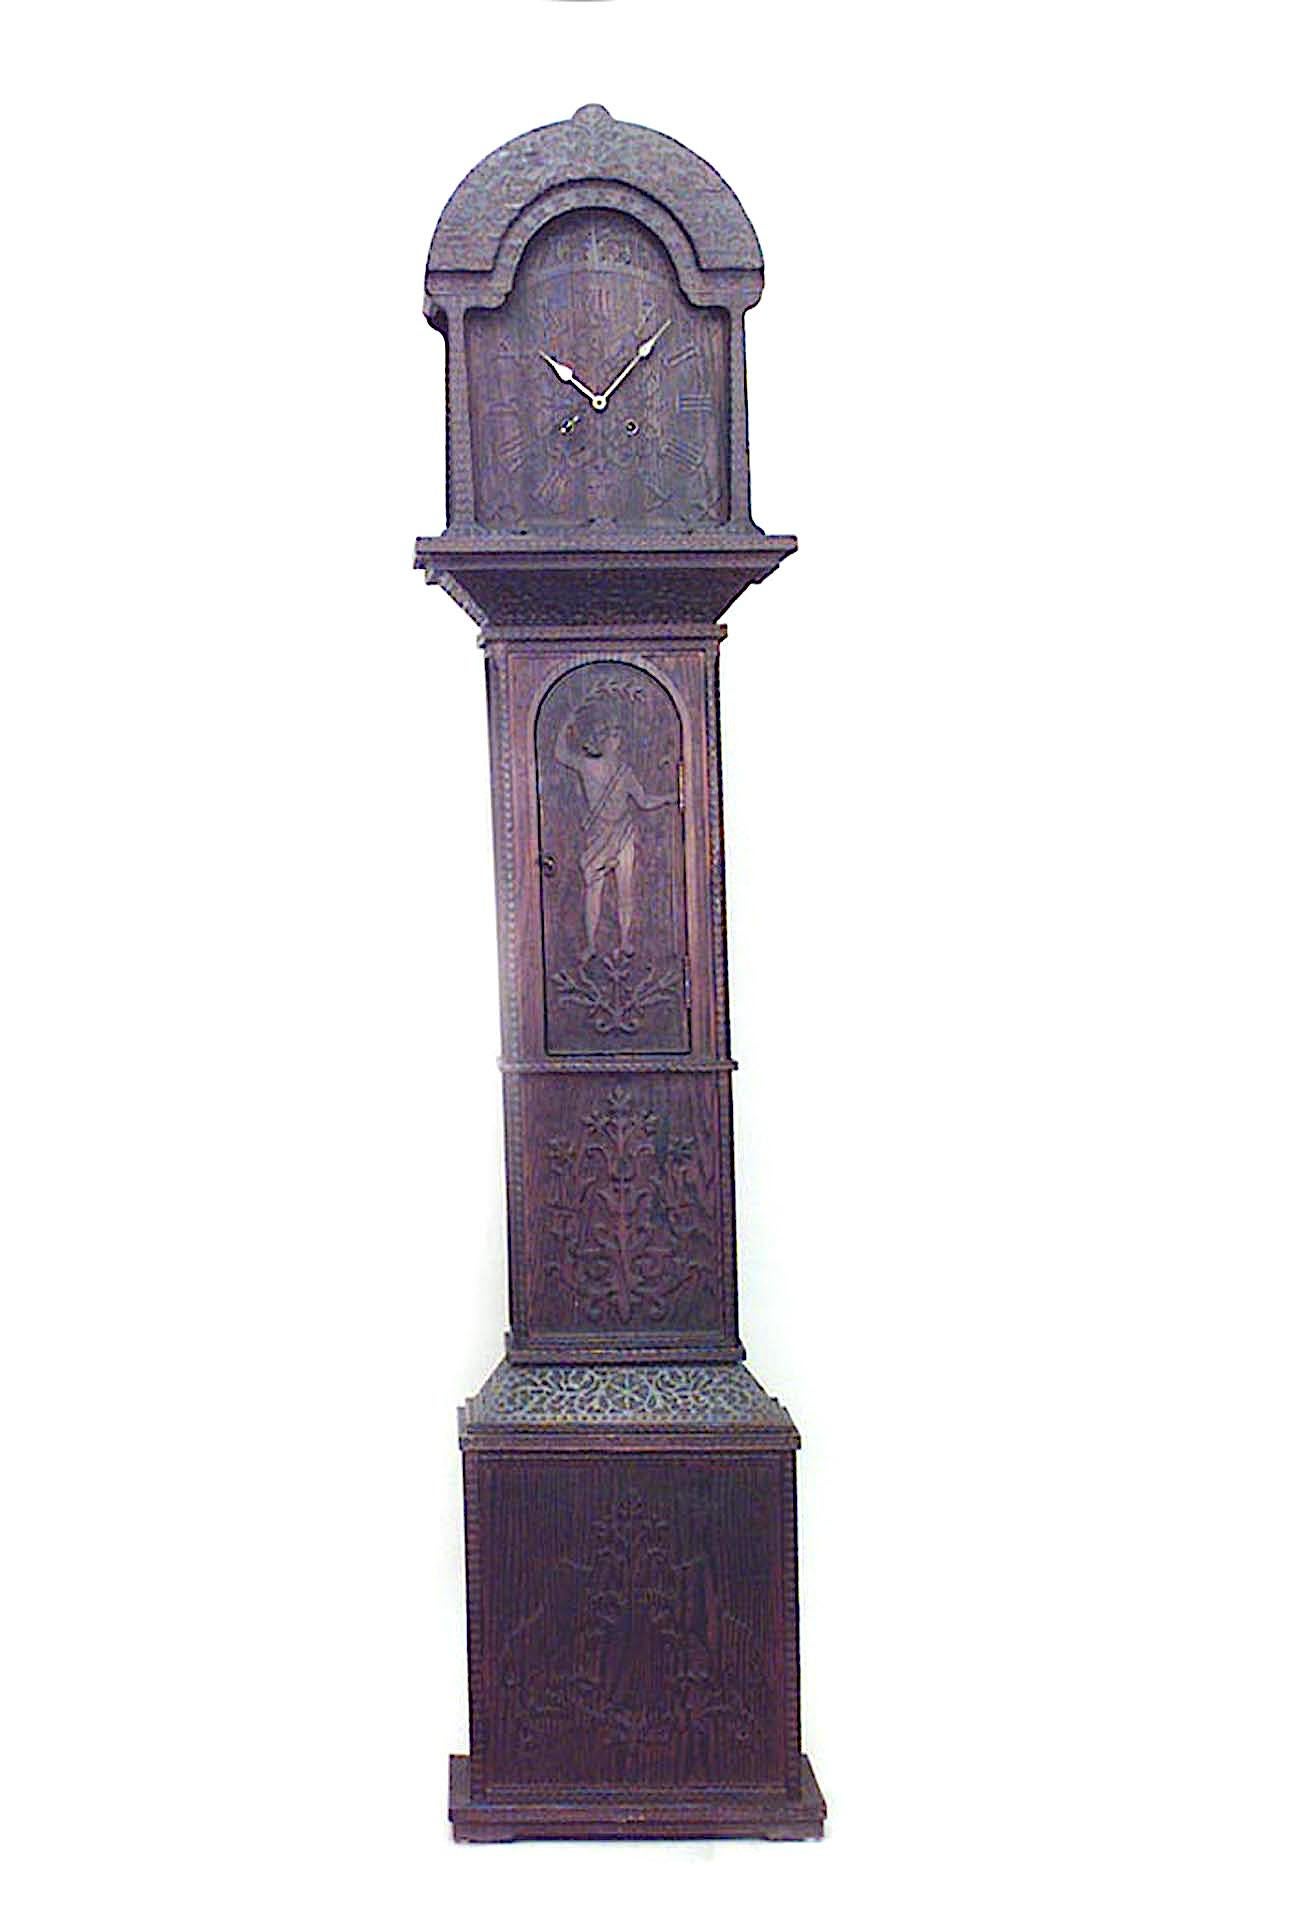 American Rustic Adirondack Tramp Art (19th Century) grandfather clock with arched pediment over relief carved figures & scrolling designs (Not working)
